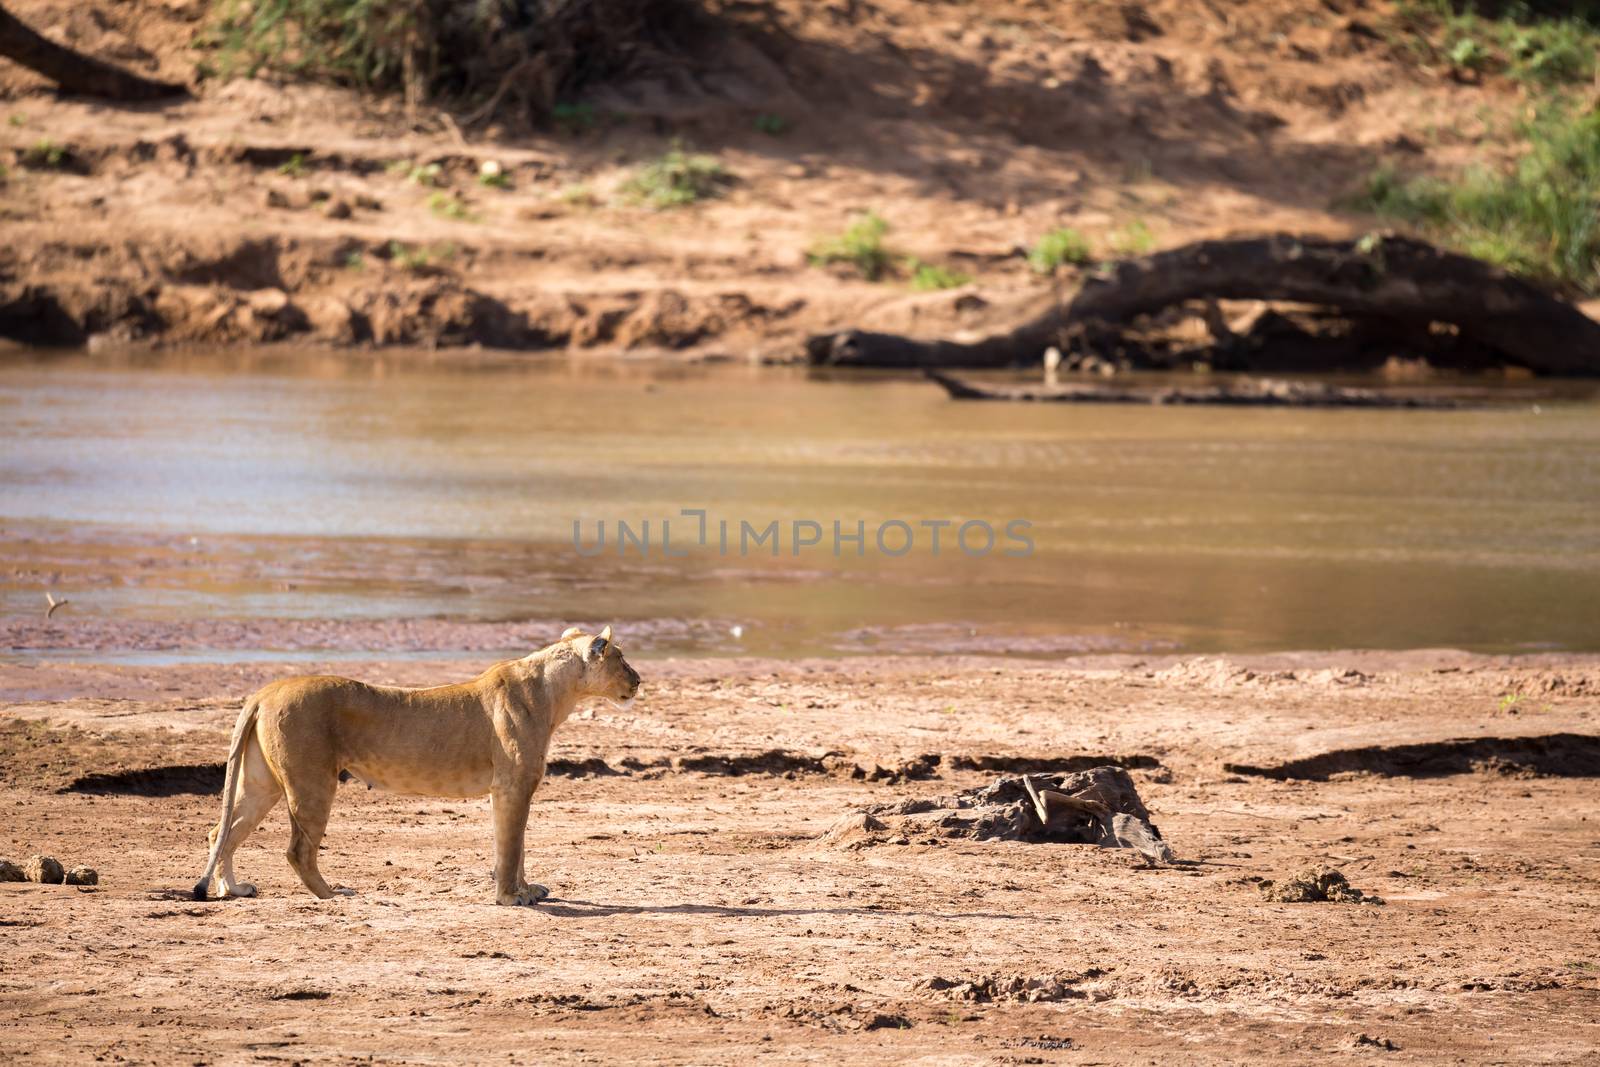 Some lions walk along the bank of a river